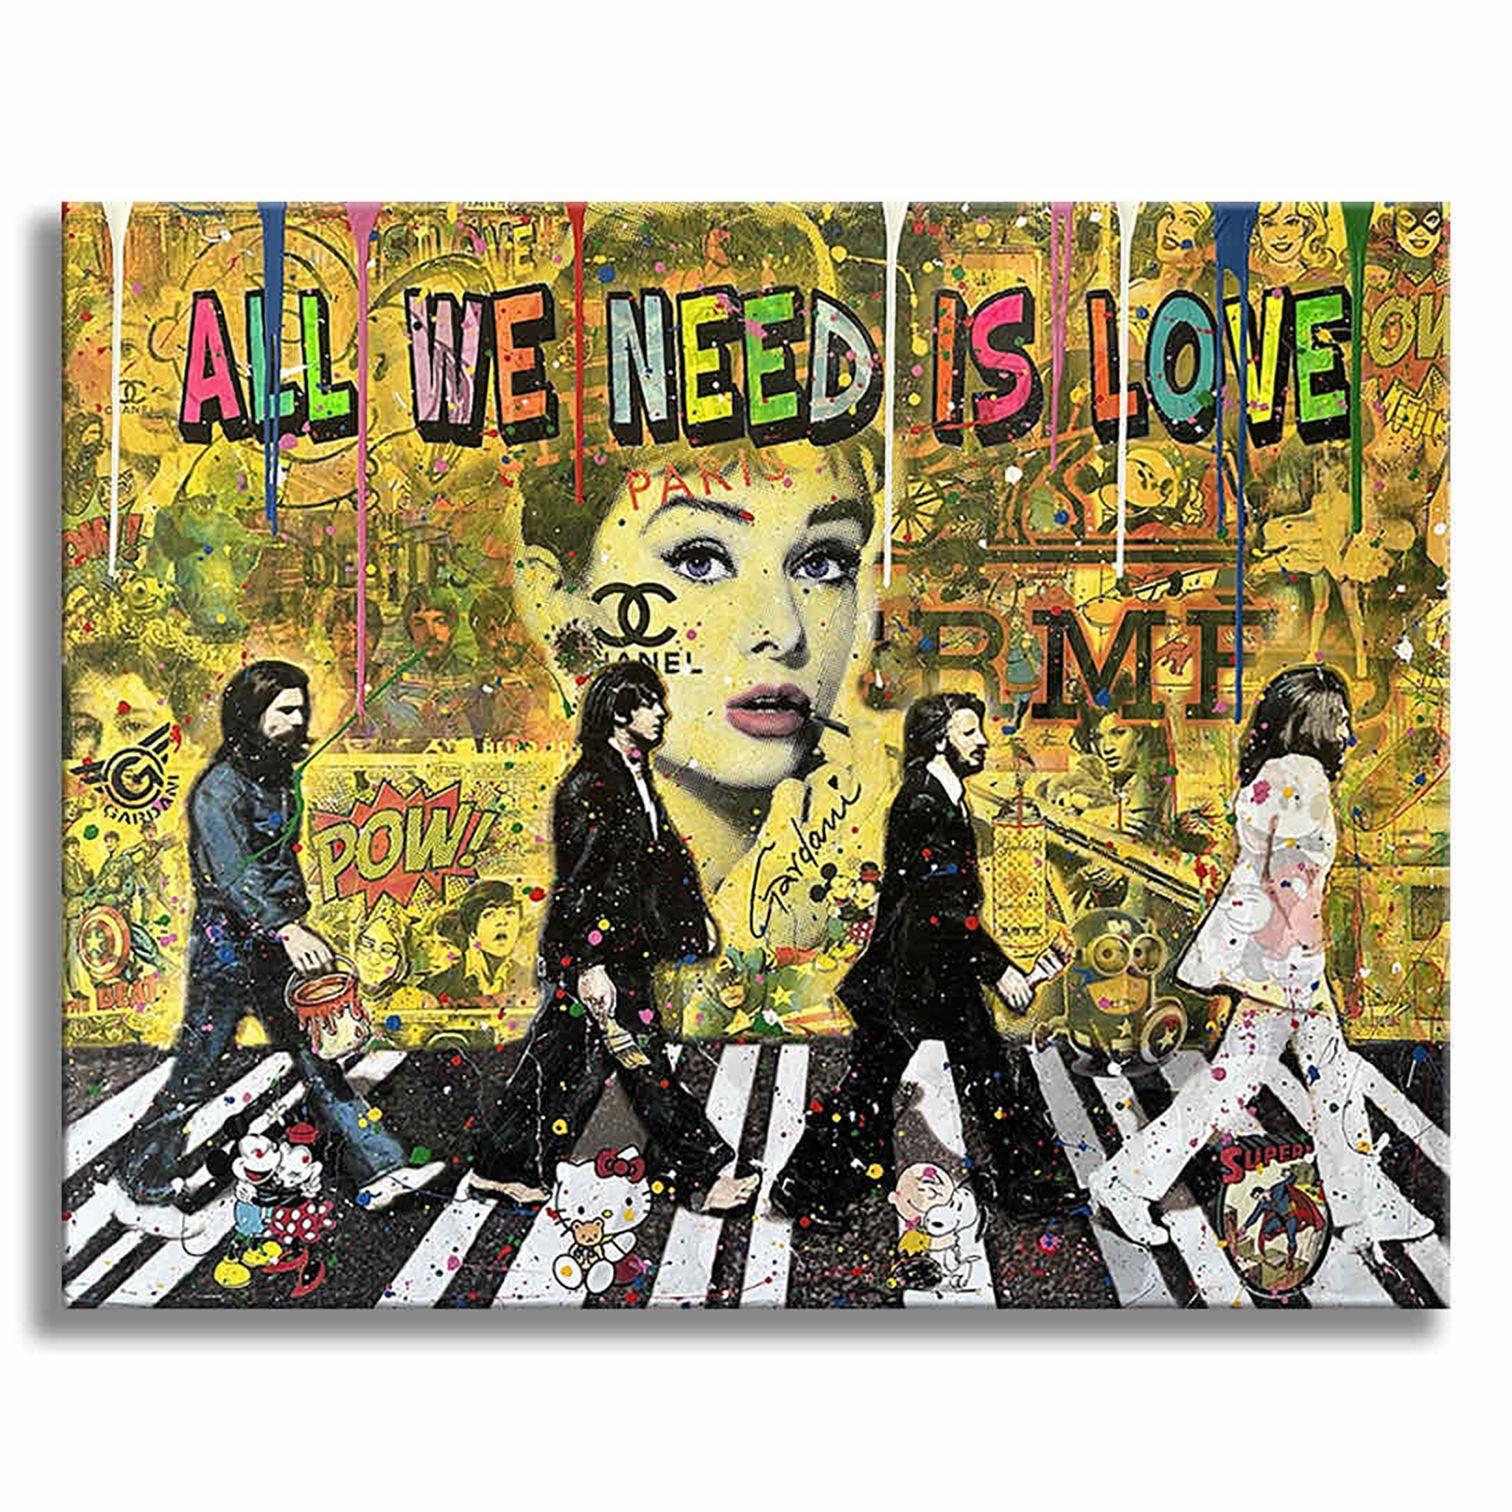 Each morning Beatles â€“ Original Painting on canvas, Painting, Acrylic on Canva For Sale 1